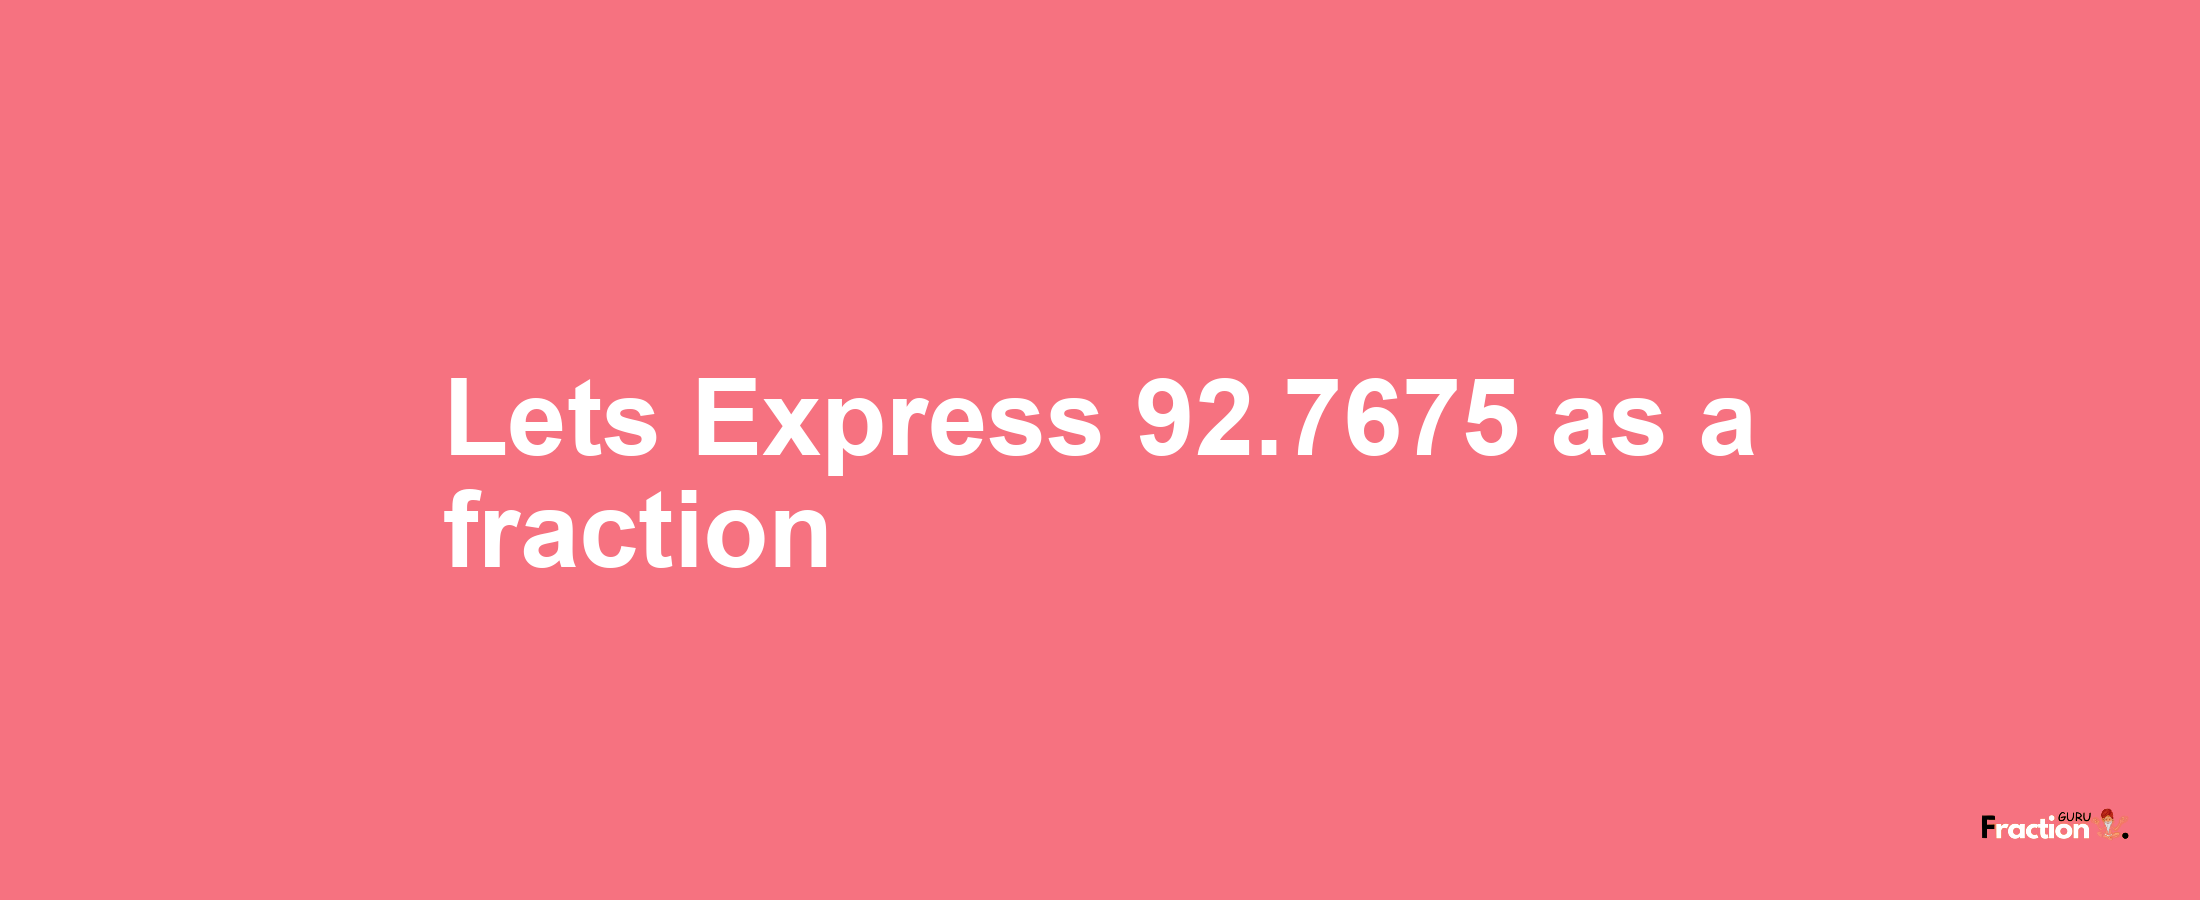 Lets Express 92.7675 as afraction